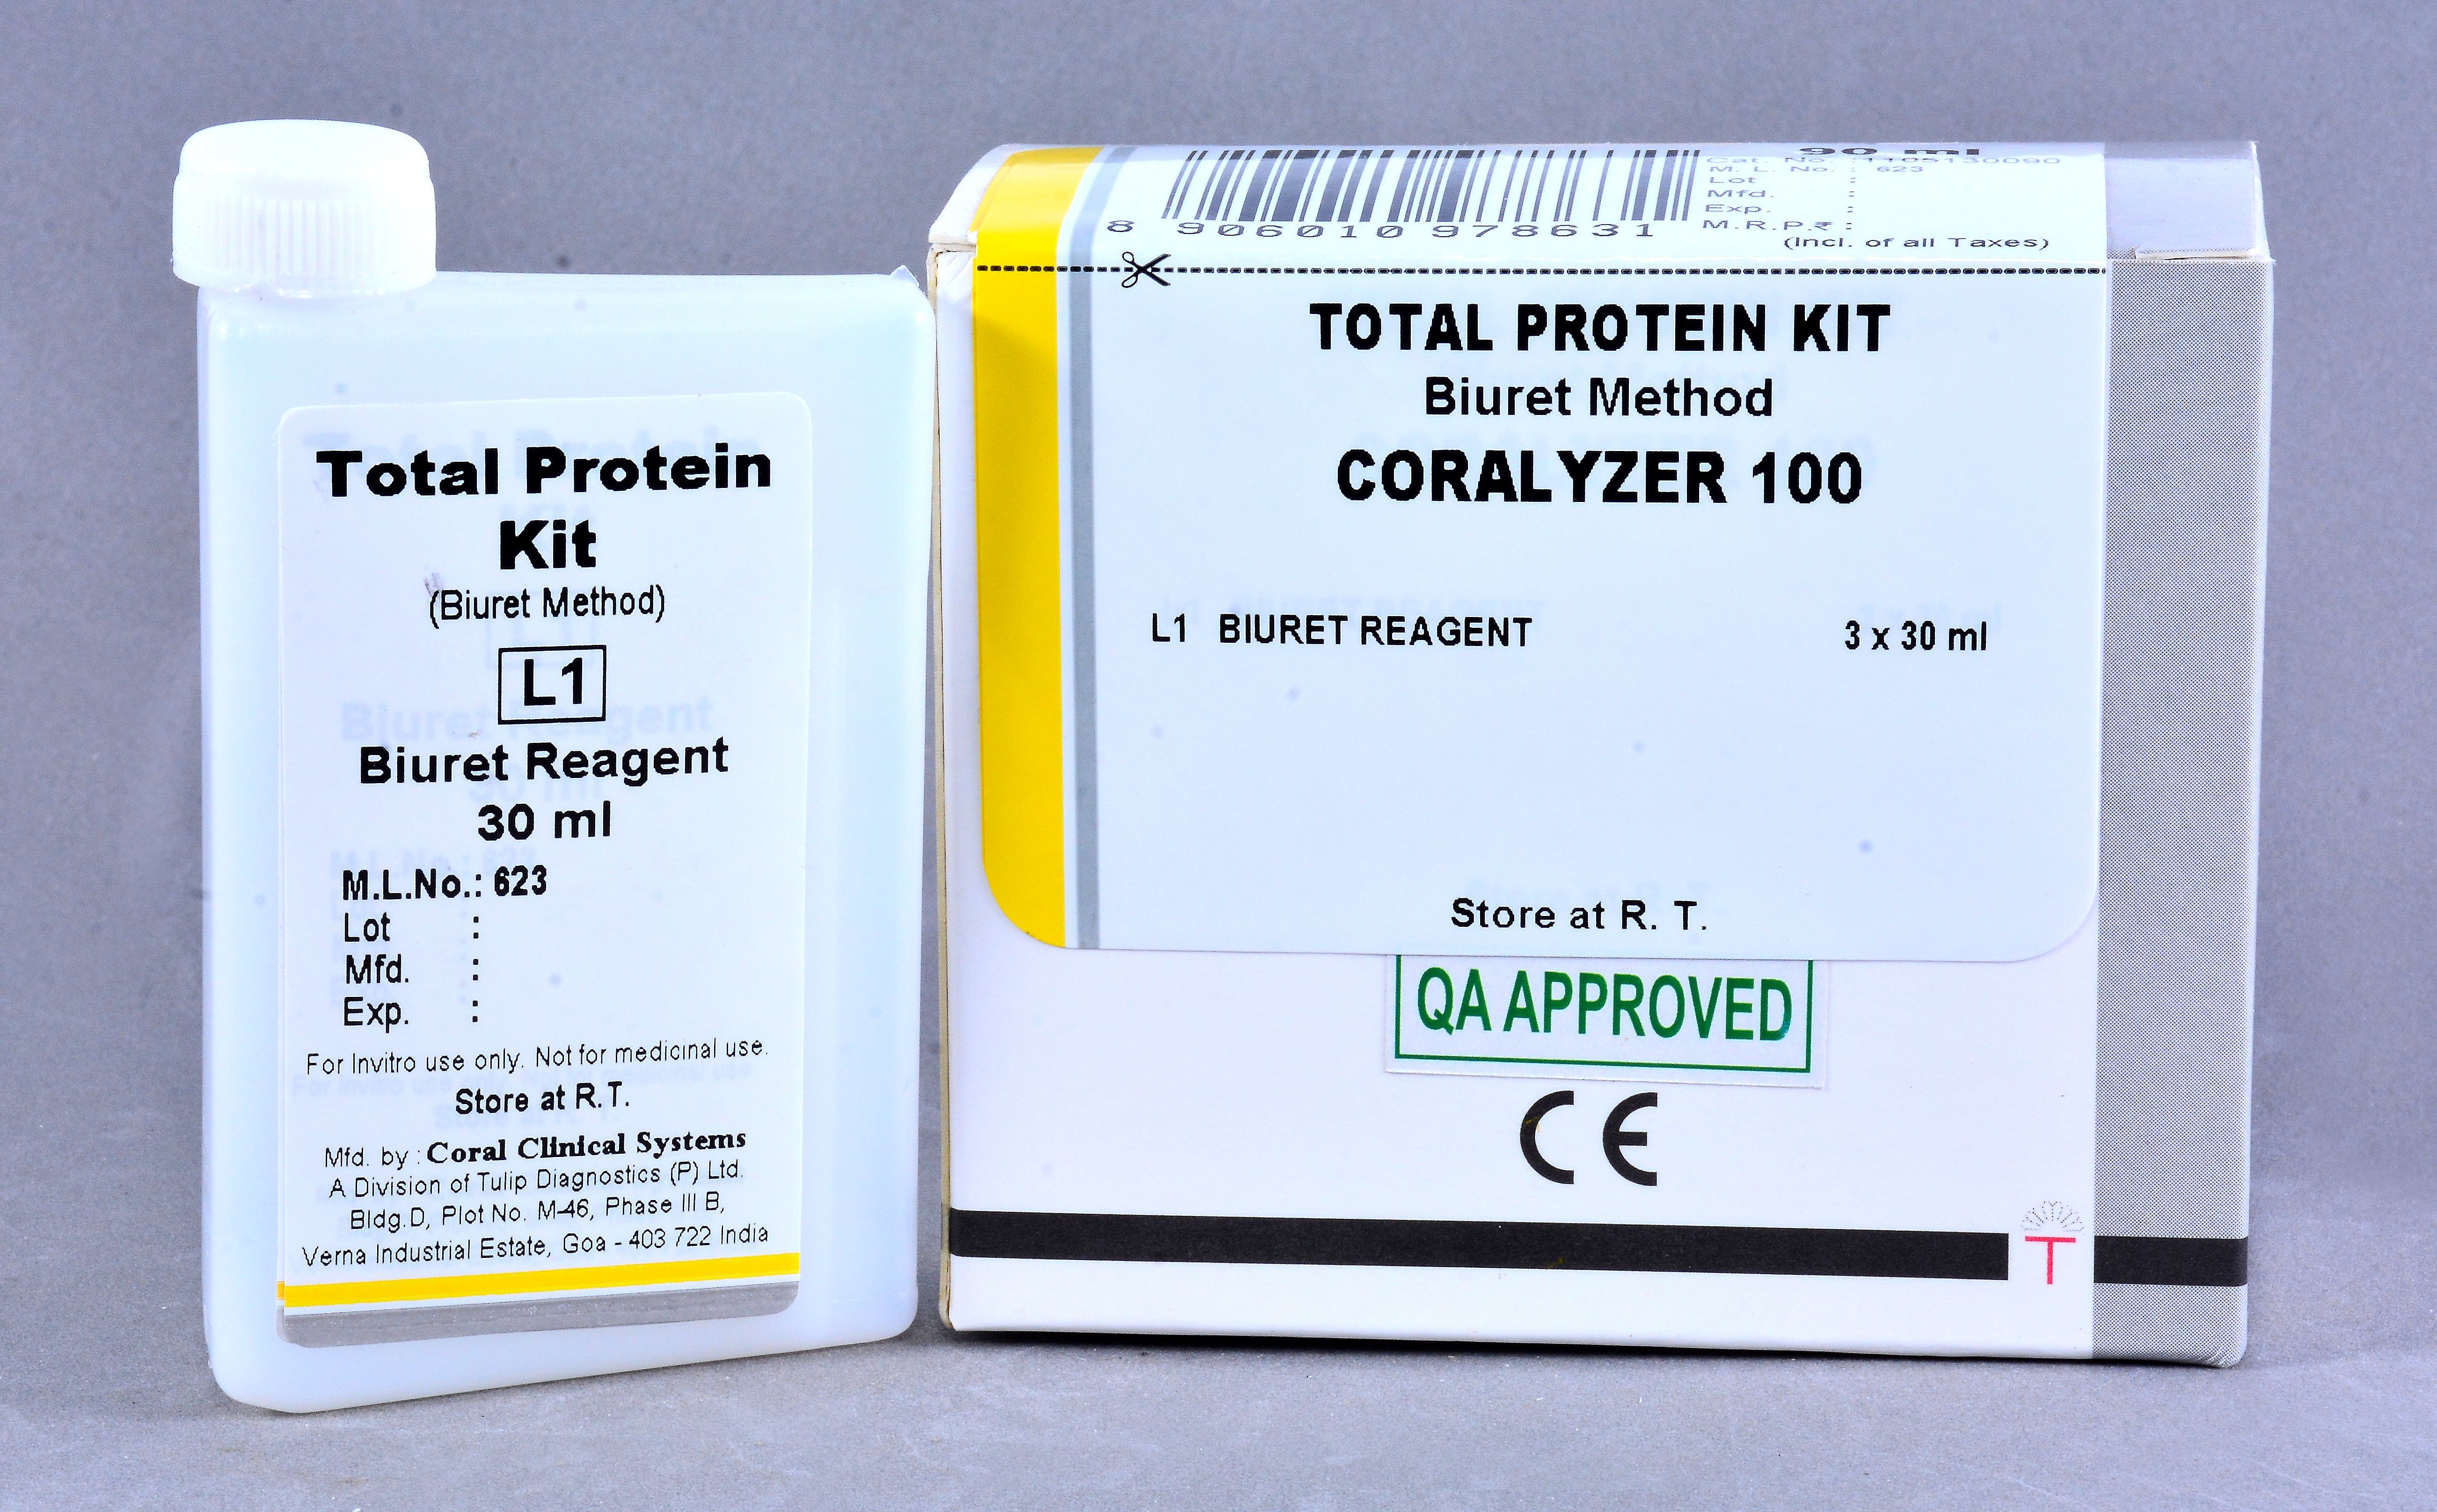 Coralyzer 100 System Pack Total Protein